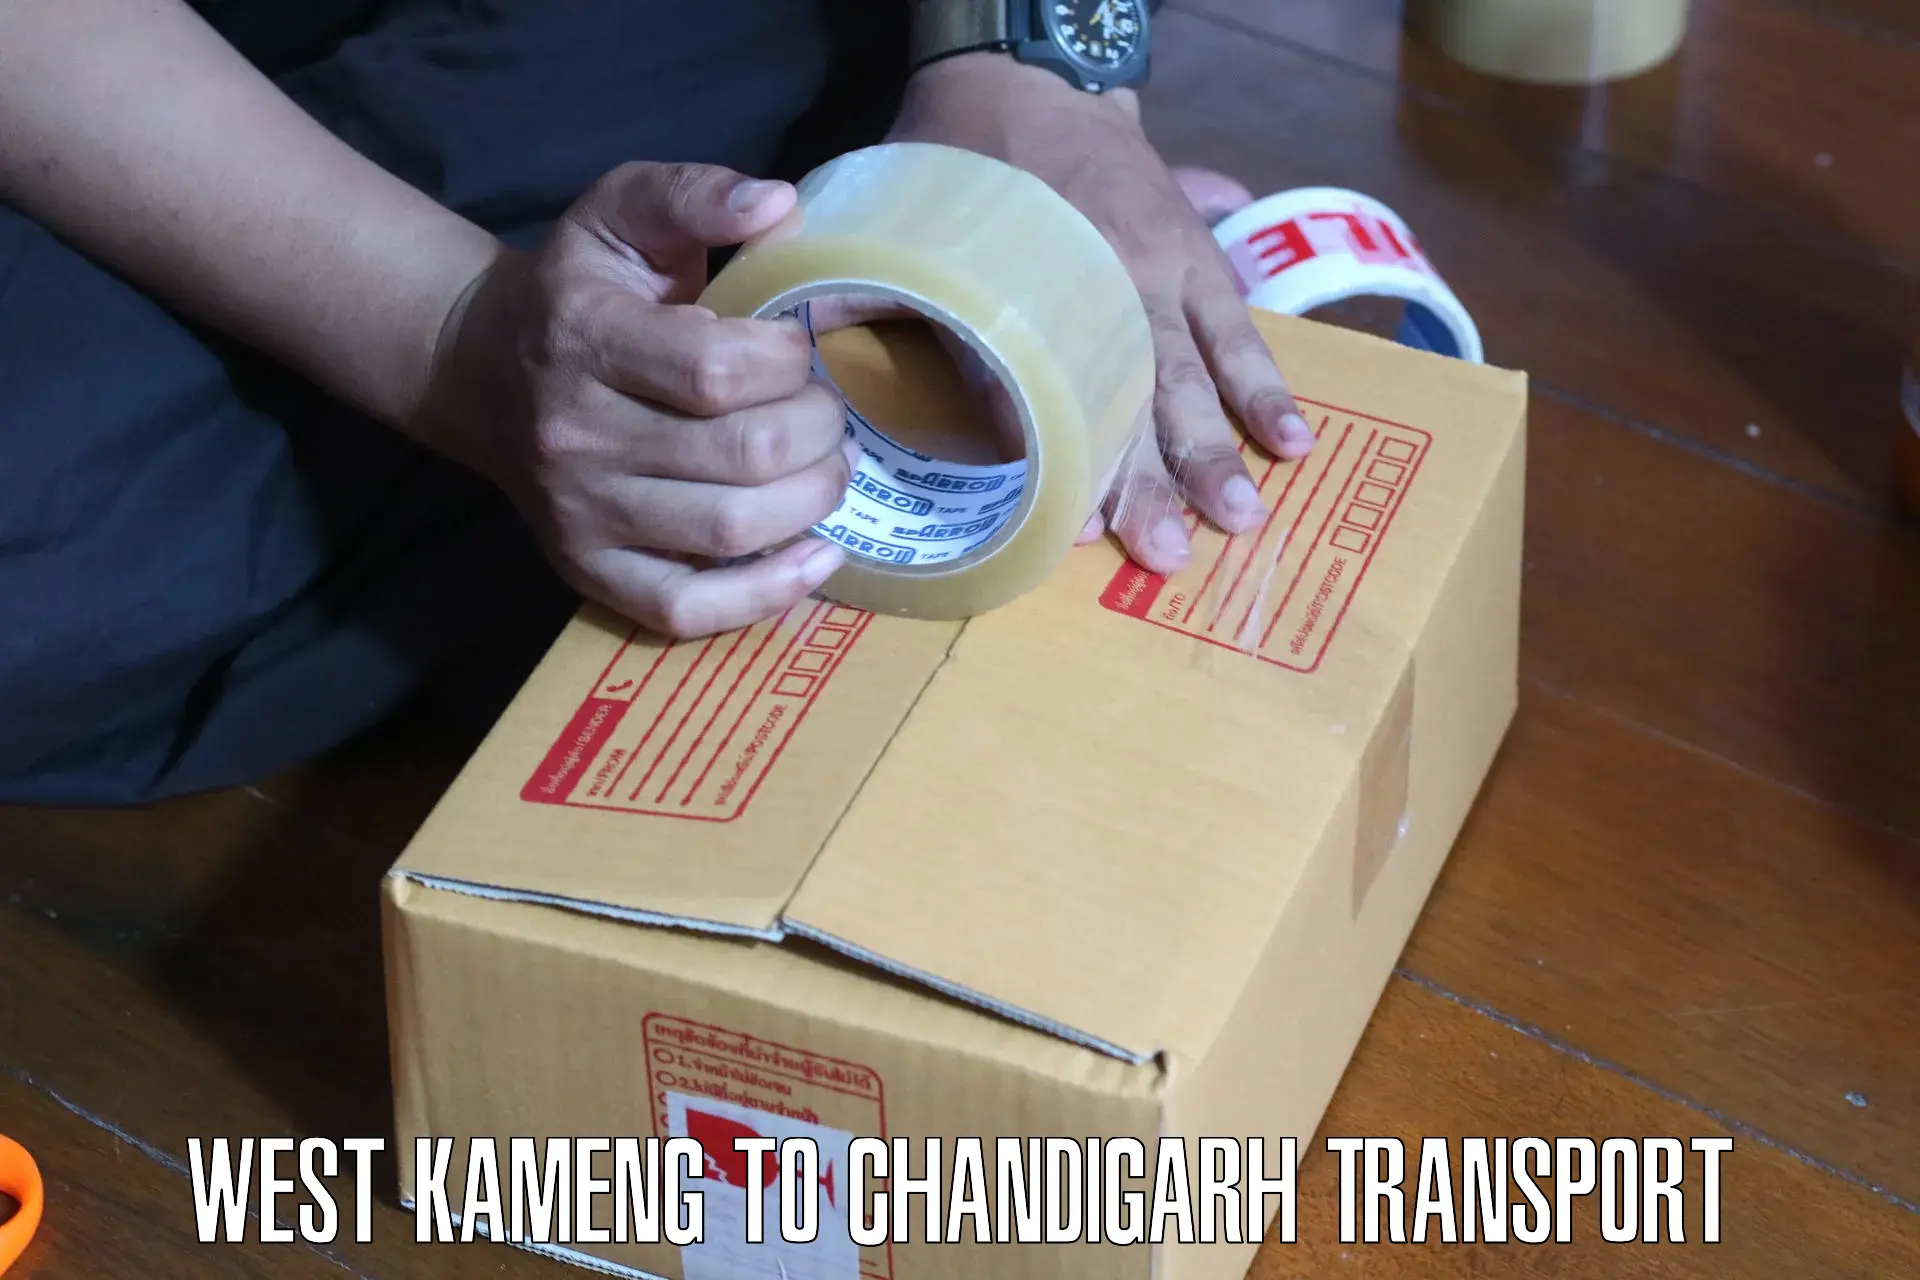 Furniture transport service in West Kameng to Chandigarh